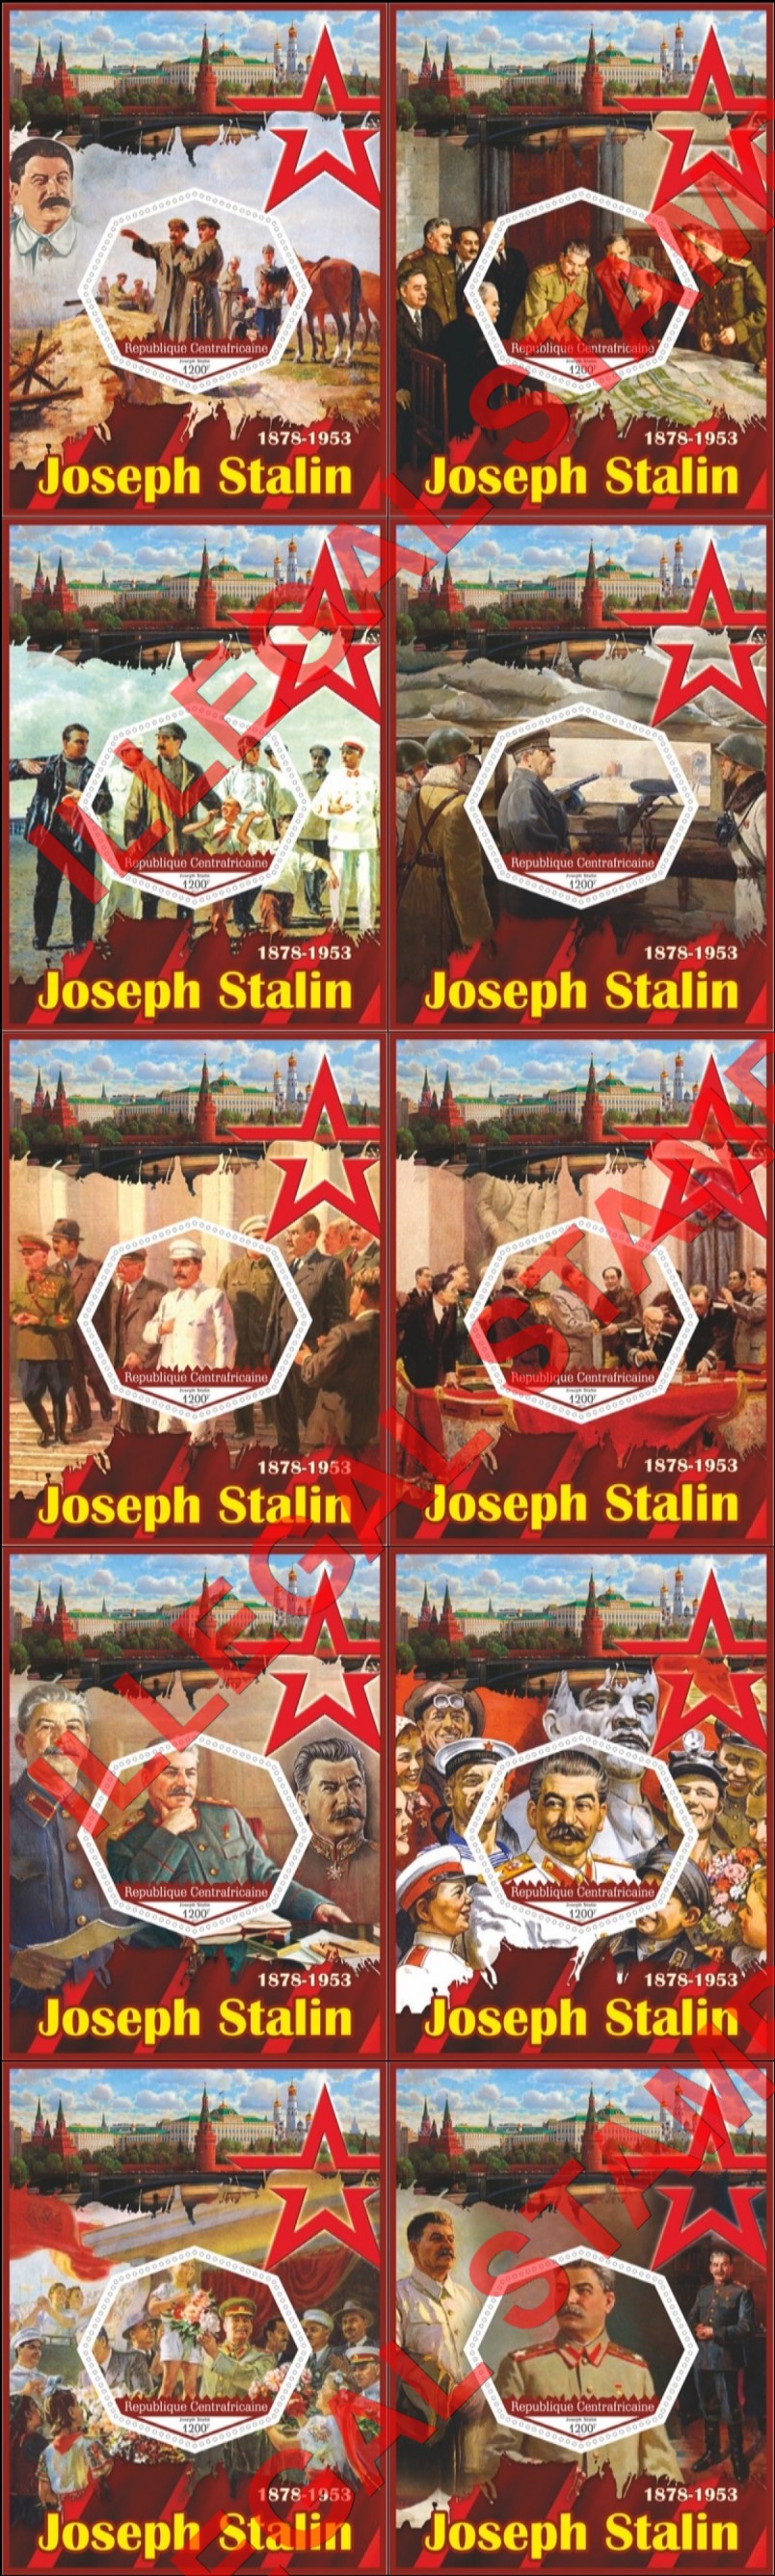 Central African Republic 2017 Joseph Stalin (different) Illegal Stamp Souvenir Sheets of 1